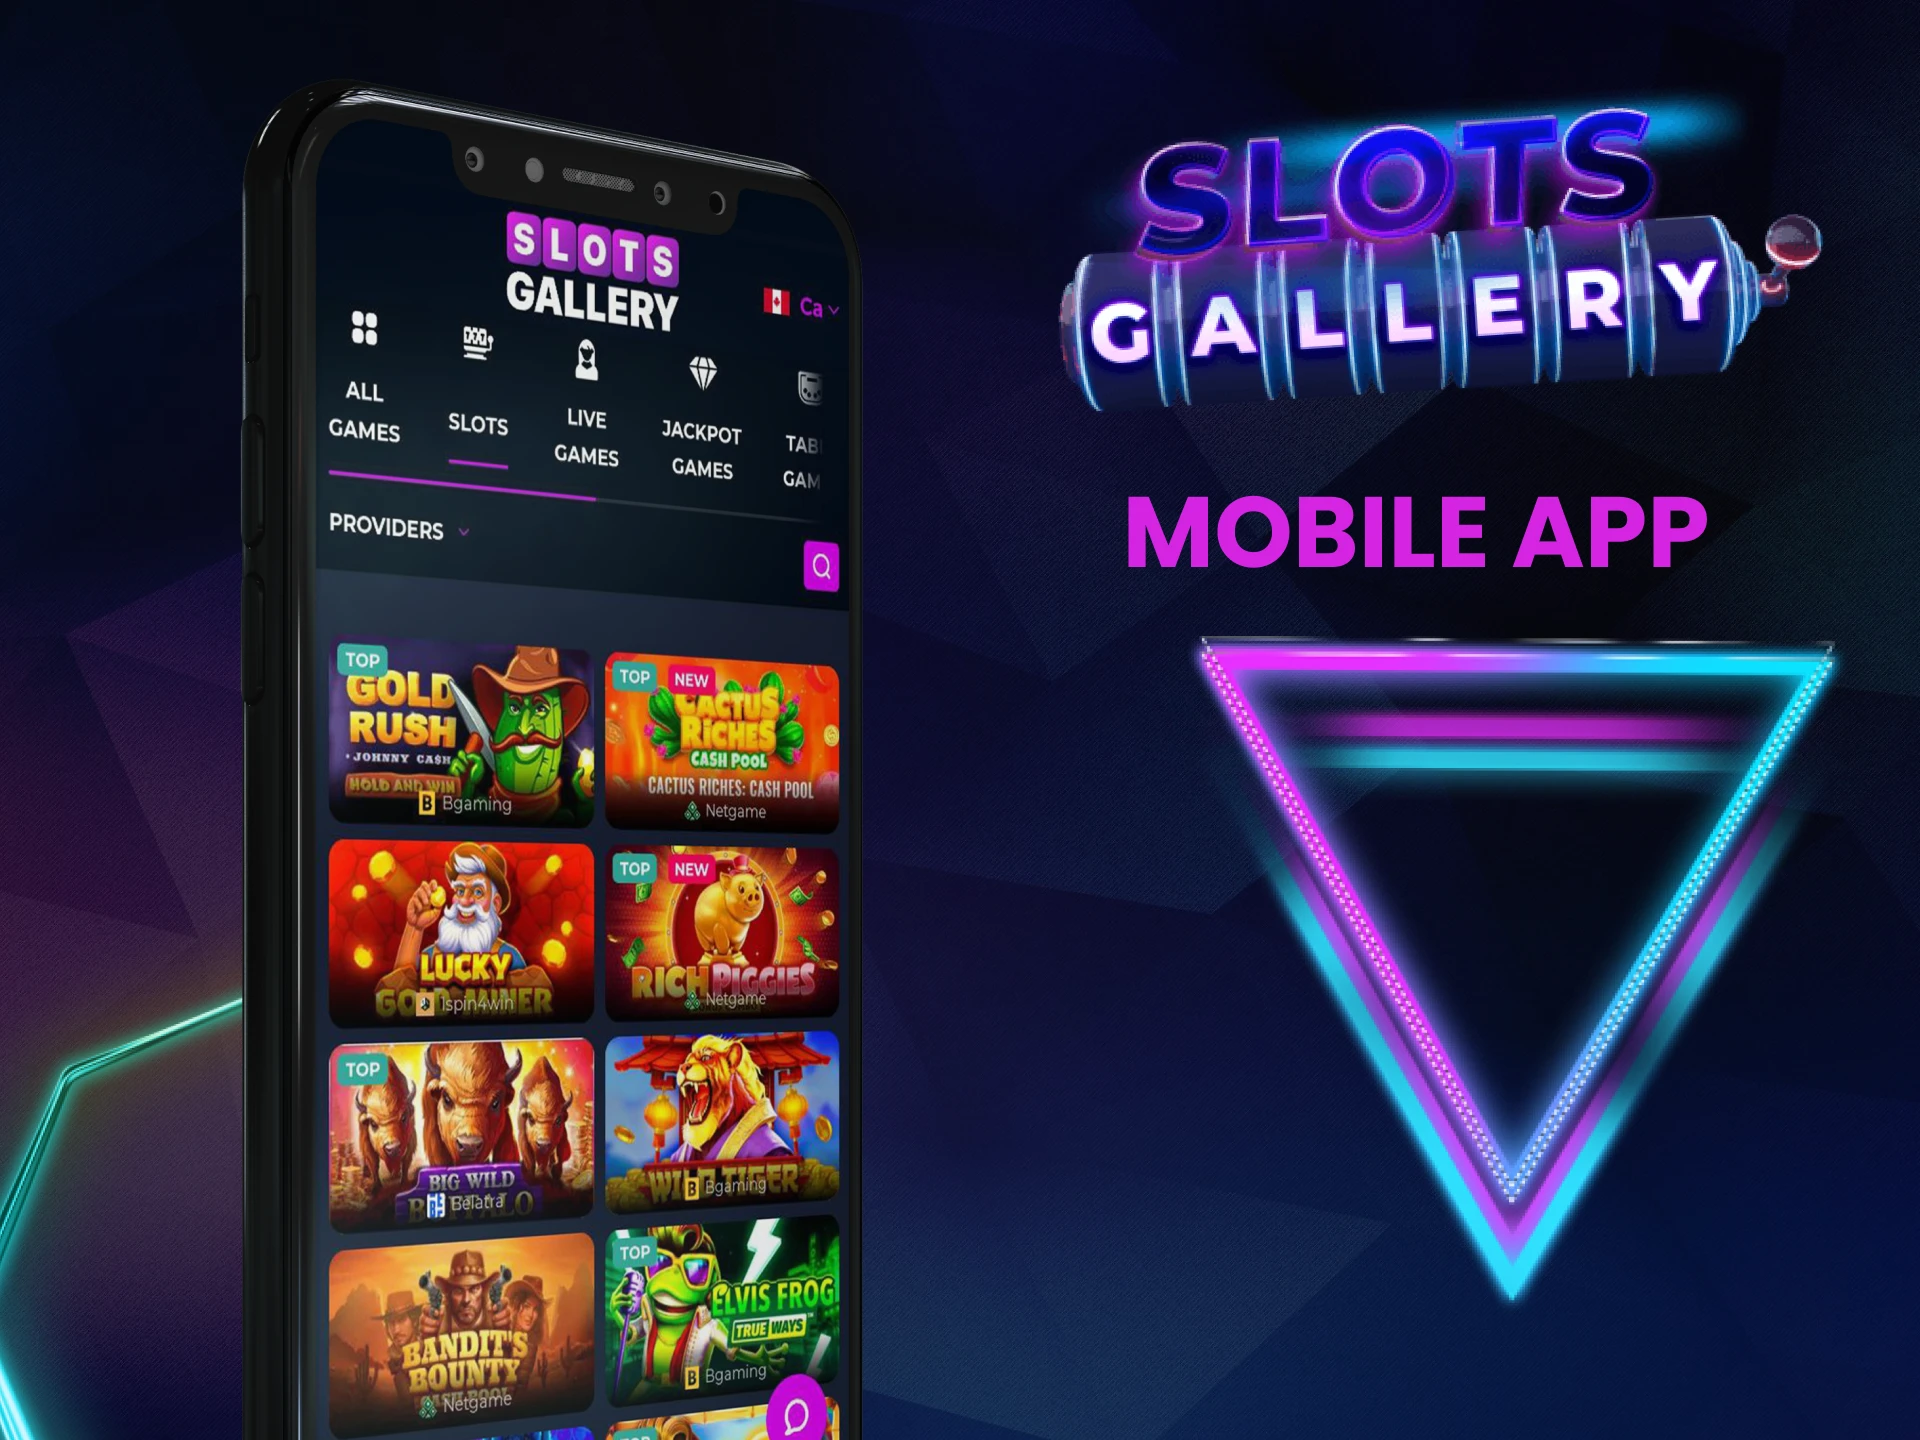 You can play slots through the Slots Gallery application.